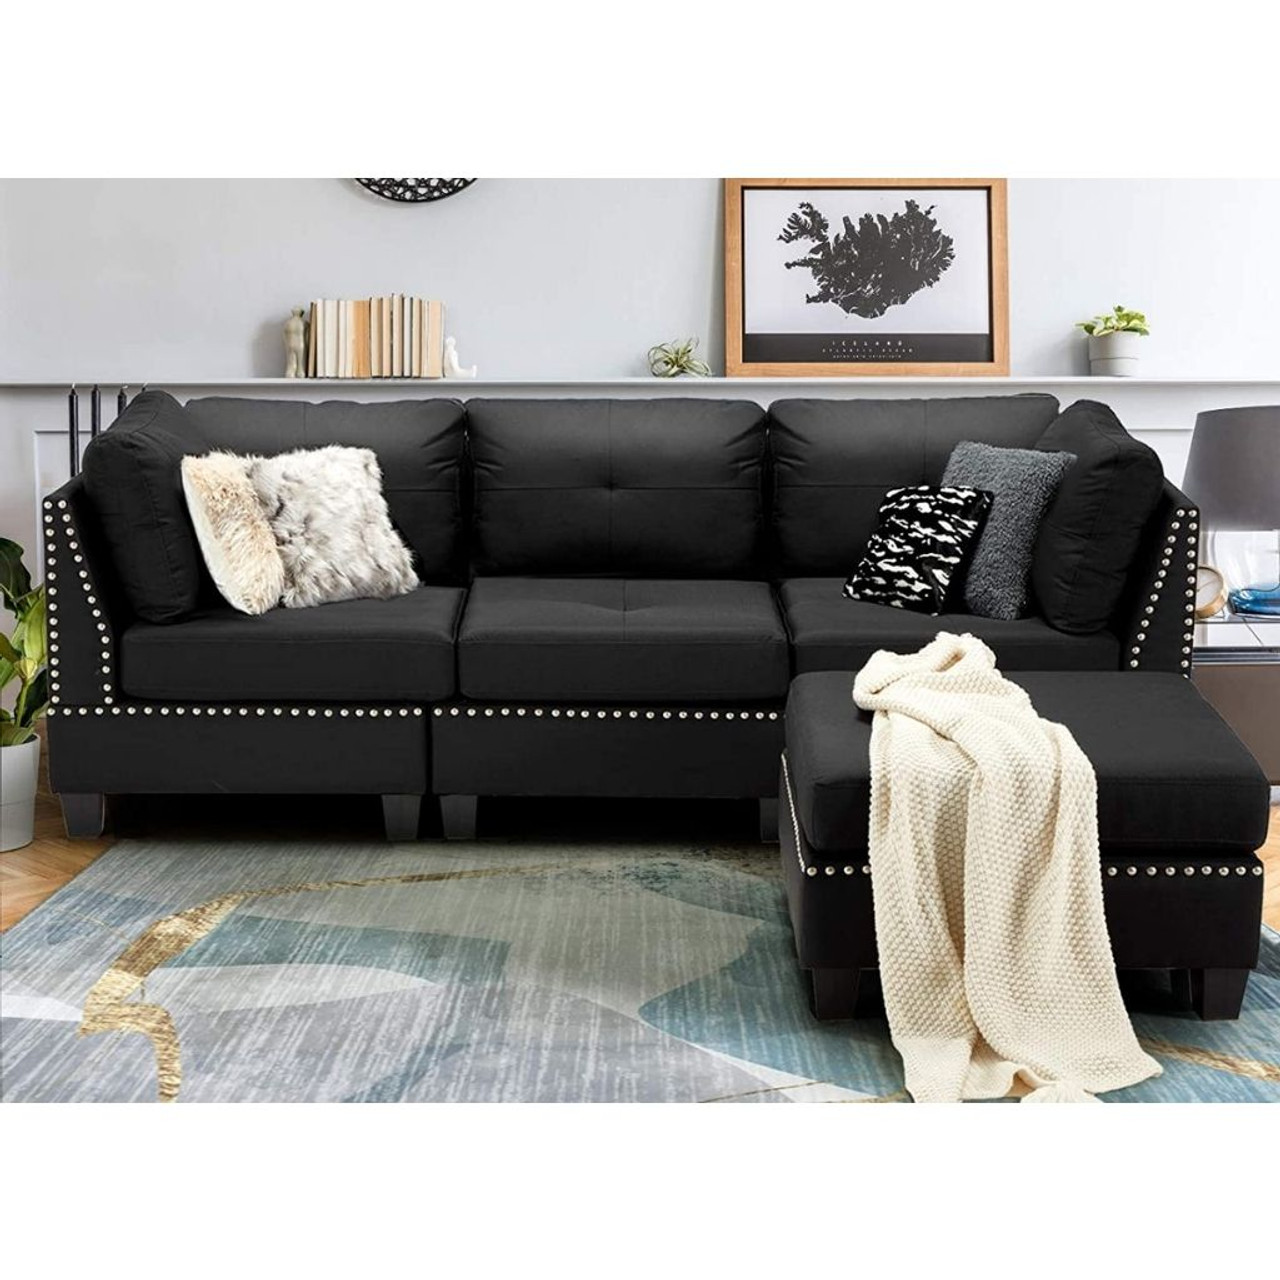 7.4' Convertible Modular Sectional Sofa Couch with Ottoman product image